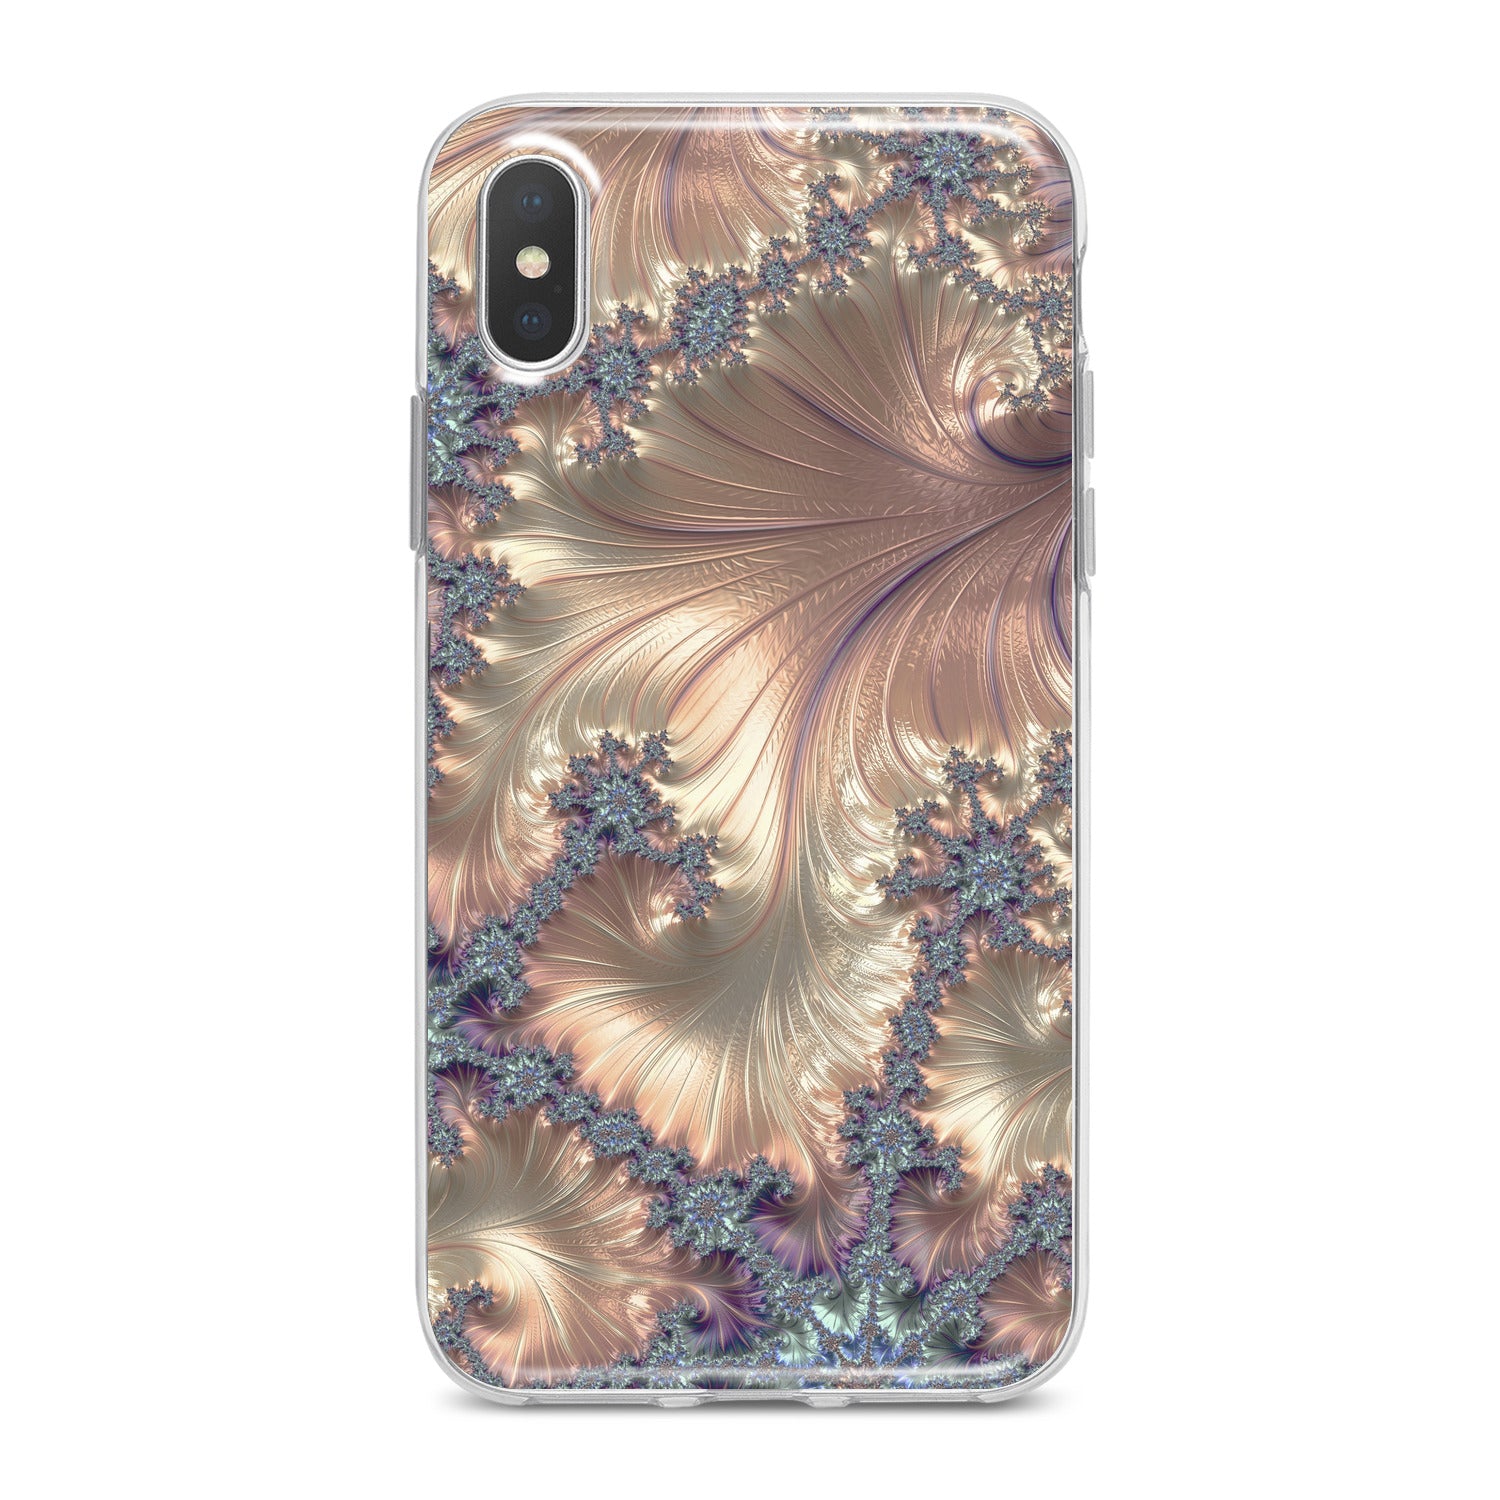 Lex Altern Golden Pattern Phone Case for your iPhone & Android phone.